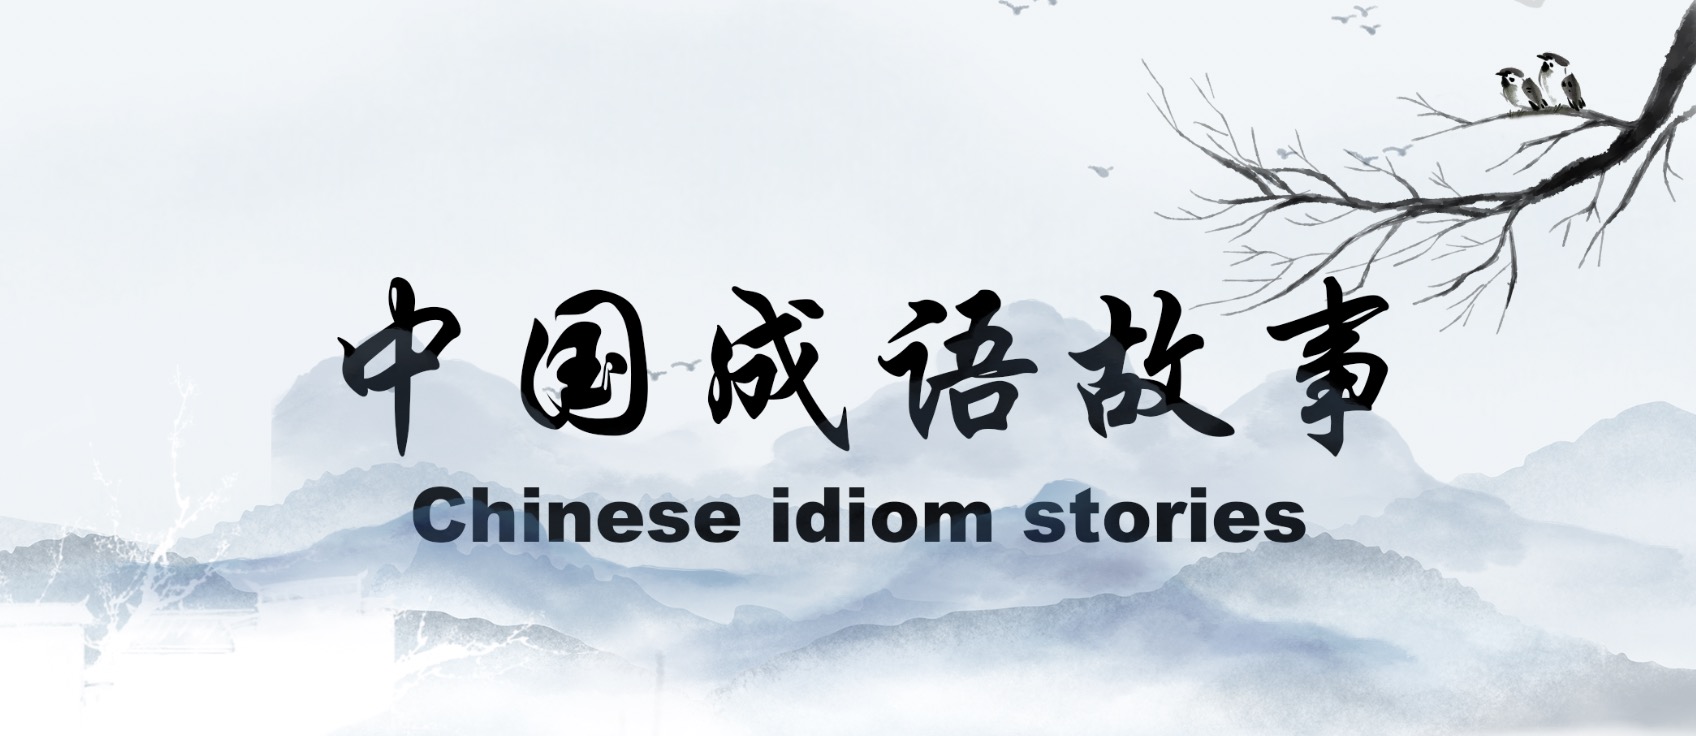 Listen to stories and learn about Chinese culture - Chinese idiom stories